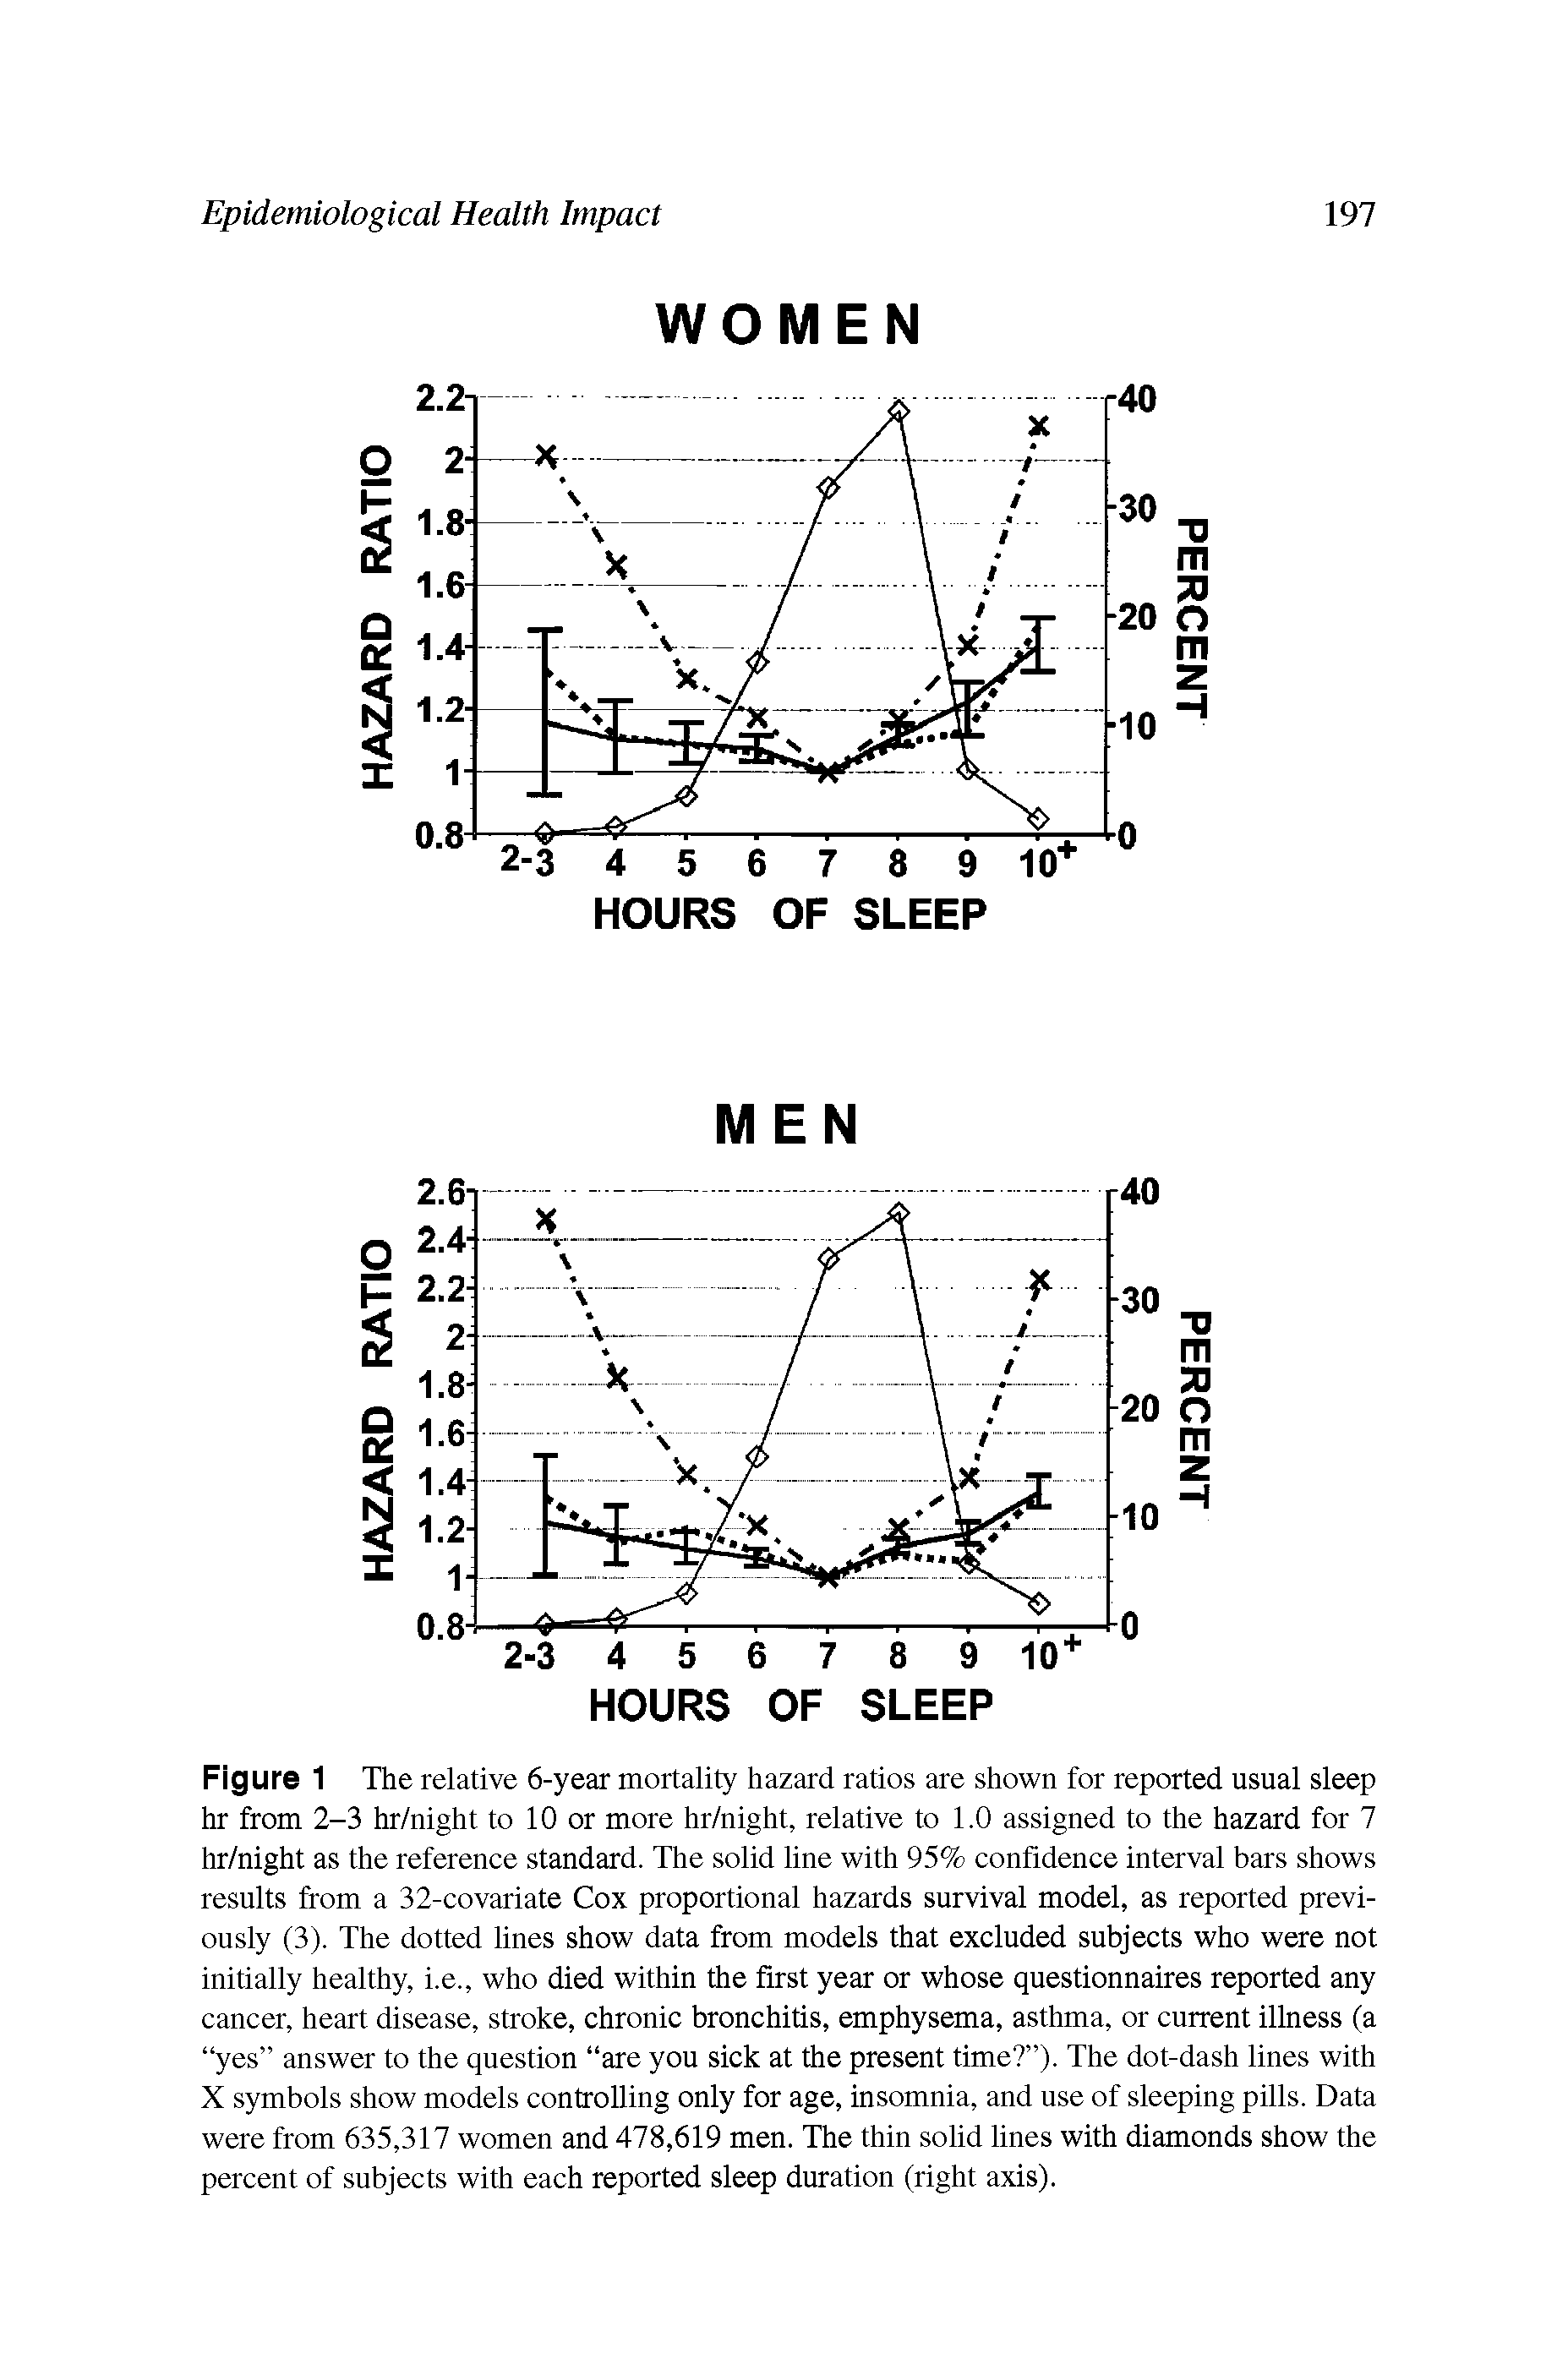 Figure 1 The relative 6-year mortality hazard ratios are shown for reported usual sleep hr from 2-3 hr/night to 10 or more hr/night, relative to 1.0 assigned to the hazard for 7 hr/night as the reference standard. The solid line with 95% confidence interval bars shows results from a 32-covariate Cox proportional hazards survival model, as reported previously (3). The dotted lines show data from models that excluded subjects who were not initially healthy, i.e., who died within the first year or whose questionnaires reported any cancer, heart disease, stroke, chronic bronchitis, emphysema, asthma, or current illness (a yes answer to the question are you sick at the present time ). The dot-dash lines with X symbols show models controlling only for age, insomnia, and use of sleeping pills. Data were from 635,317 women and 478,619 men. The thin solid lines with diamonds show the percent of subjects with each reported sleep duration (right axis).